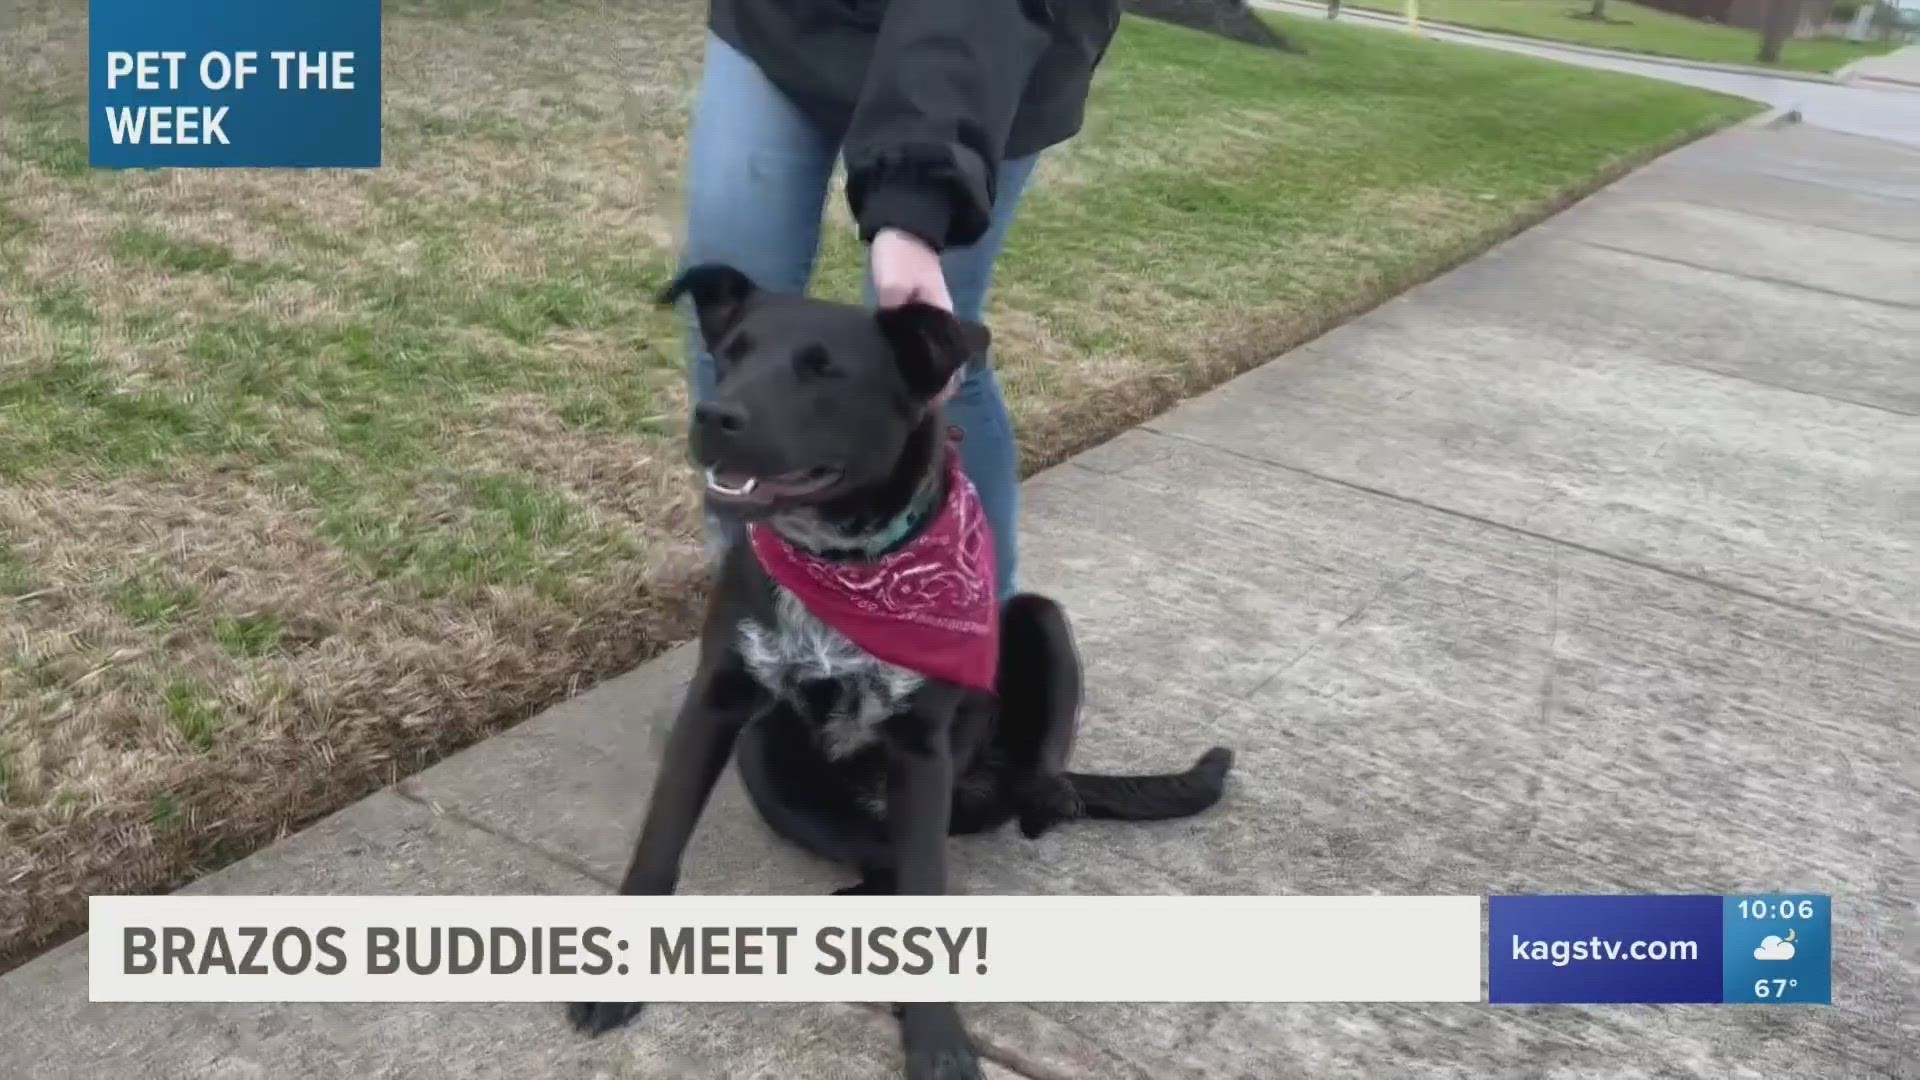 This week's featured Brazos Buddy is Sissy, a seven-month-old mixed breed that's looking to be adopted.